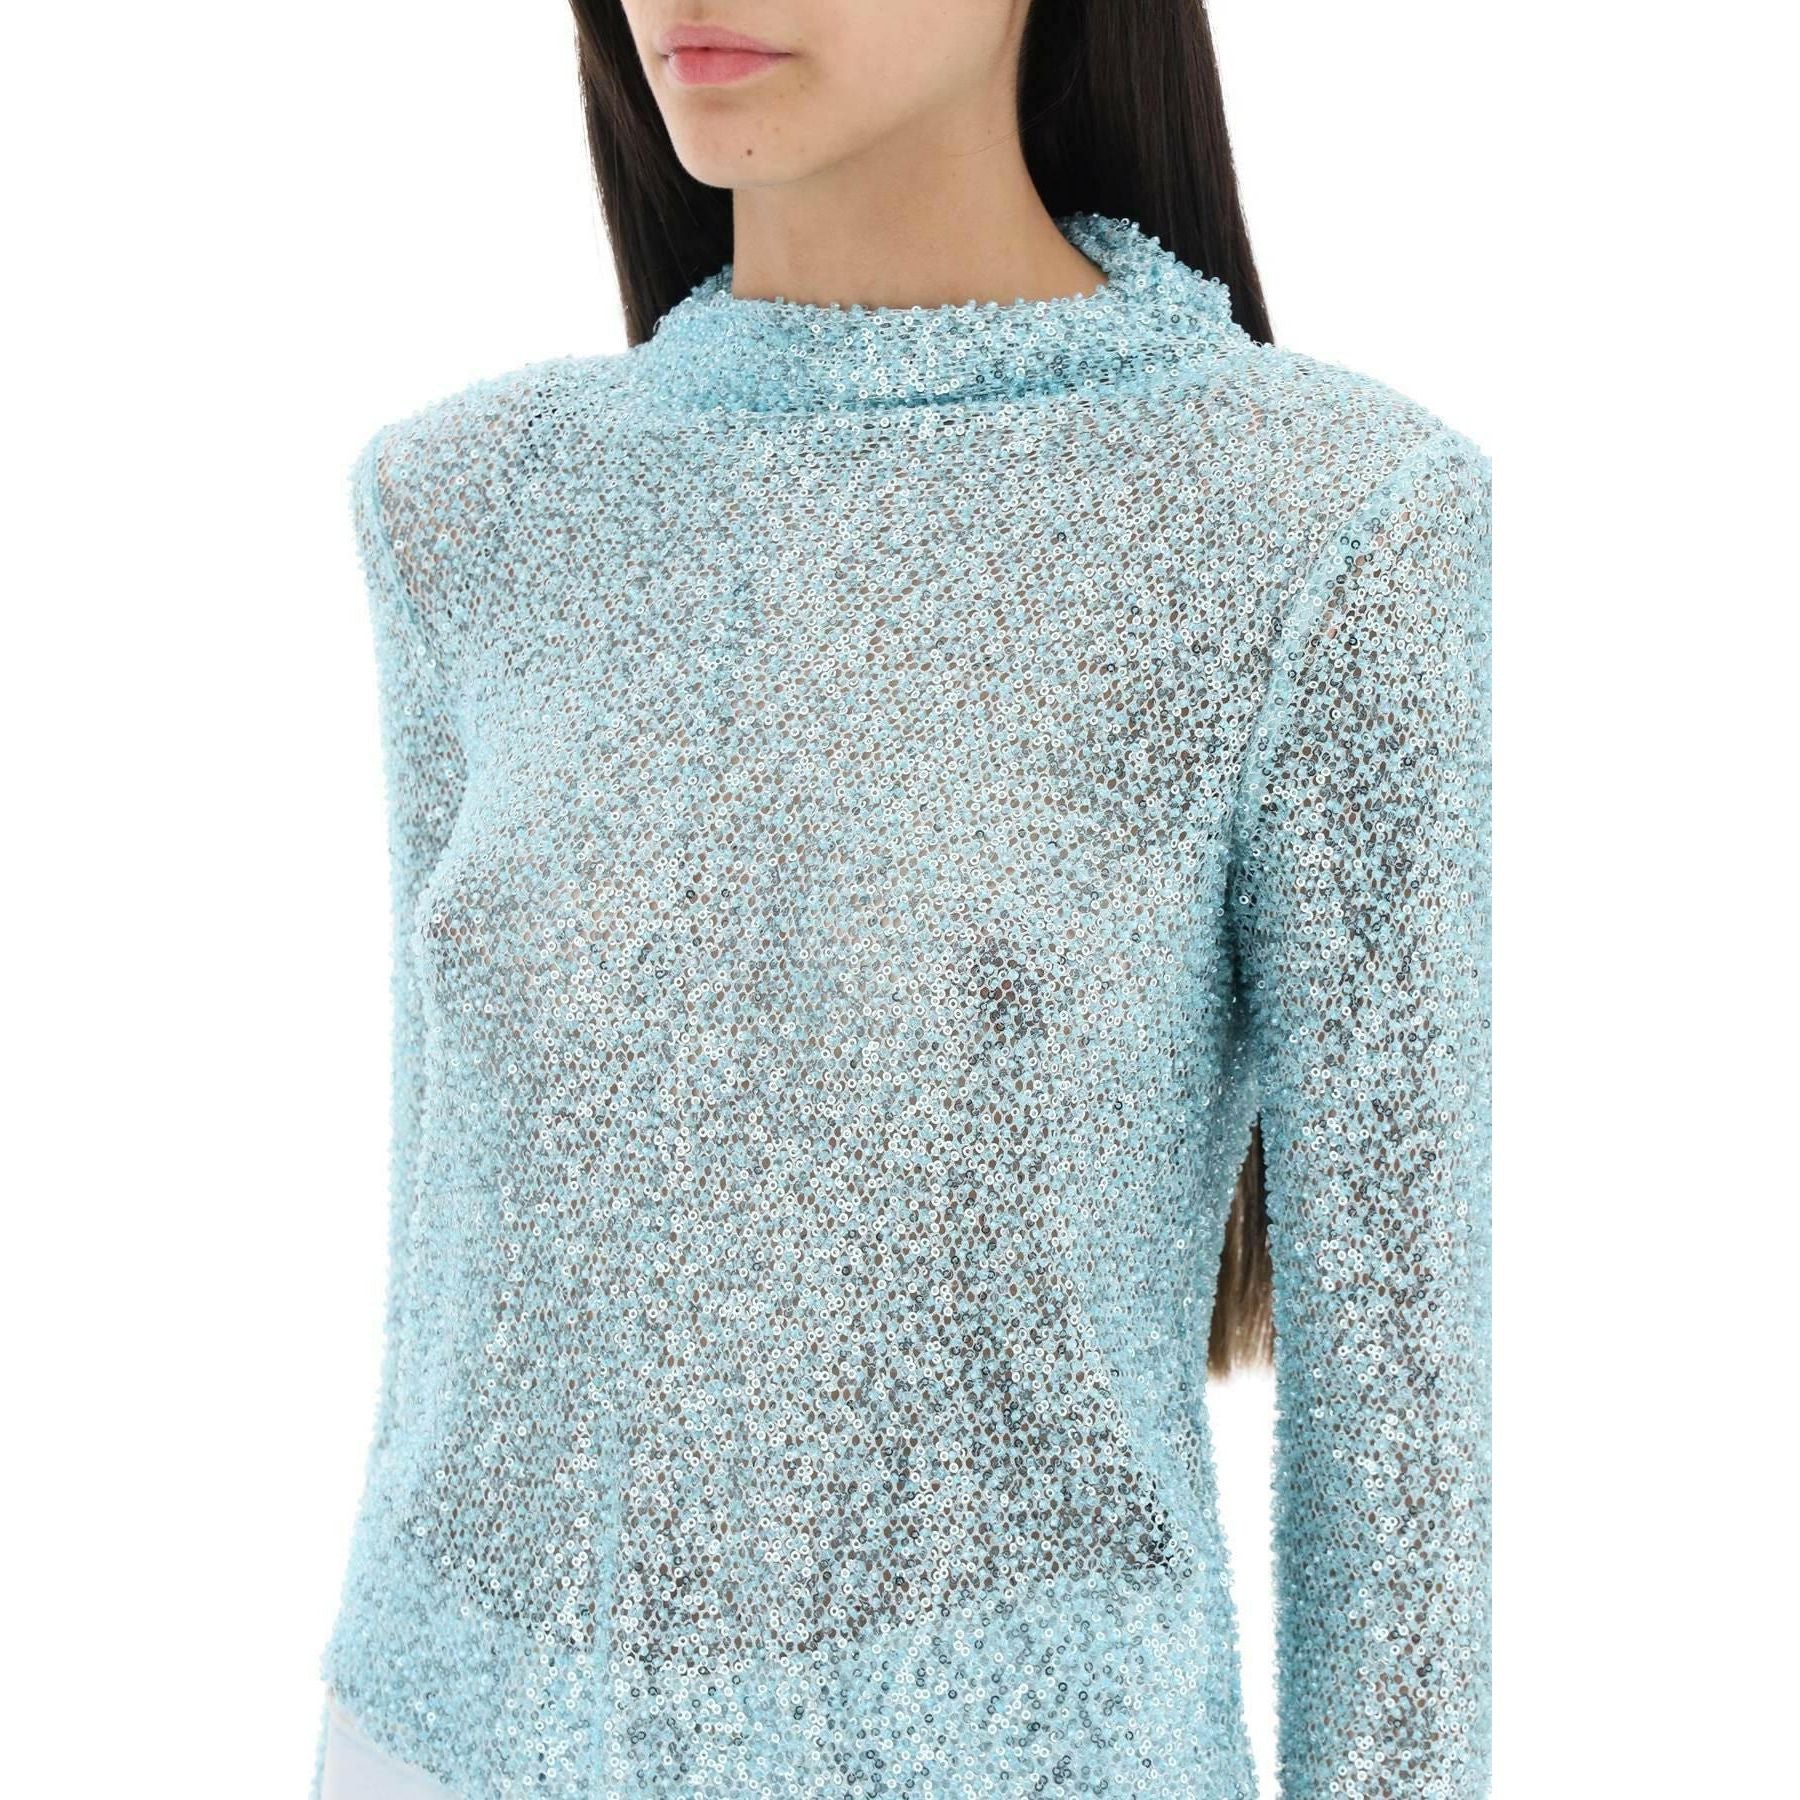 Long Sleeved Top With Sequins And Beads SELF PORTRAIT JOHN JULIA.